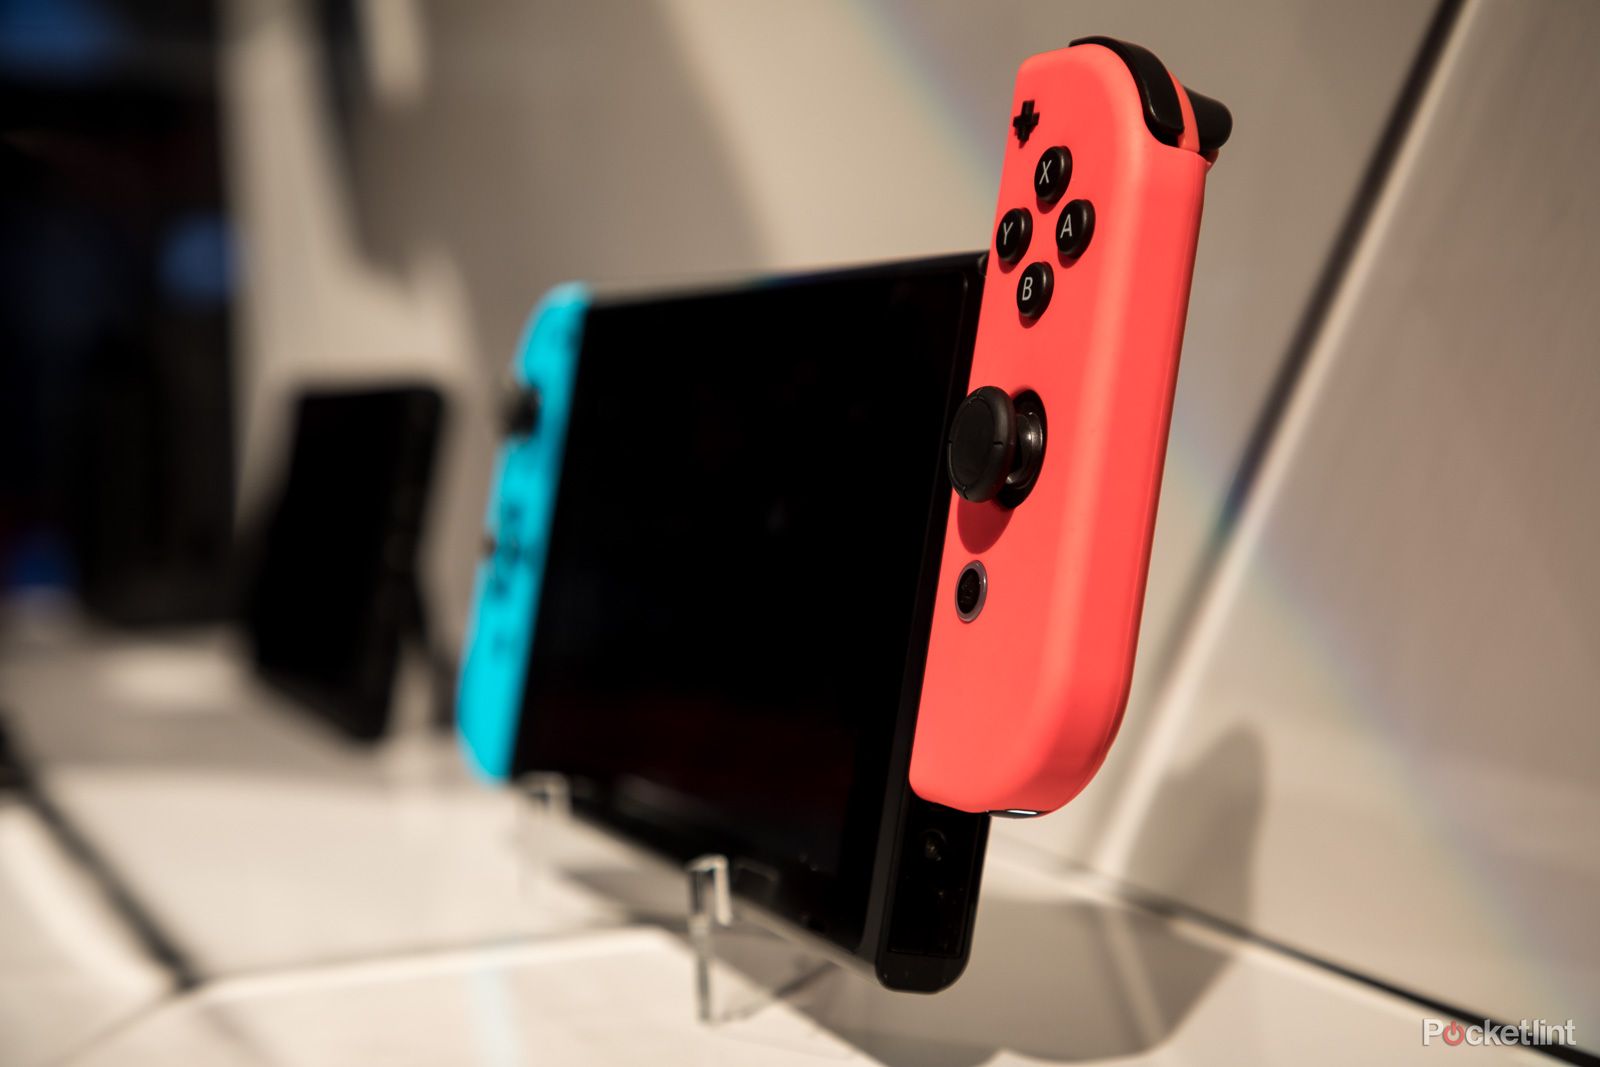 Nintendo reveals Switch price and date - BBC News